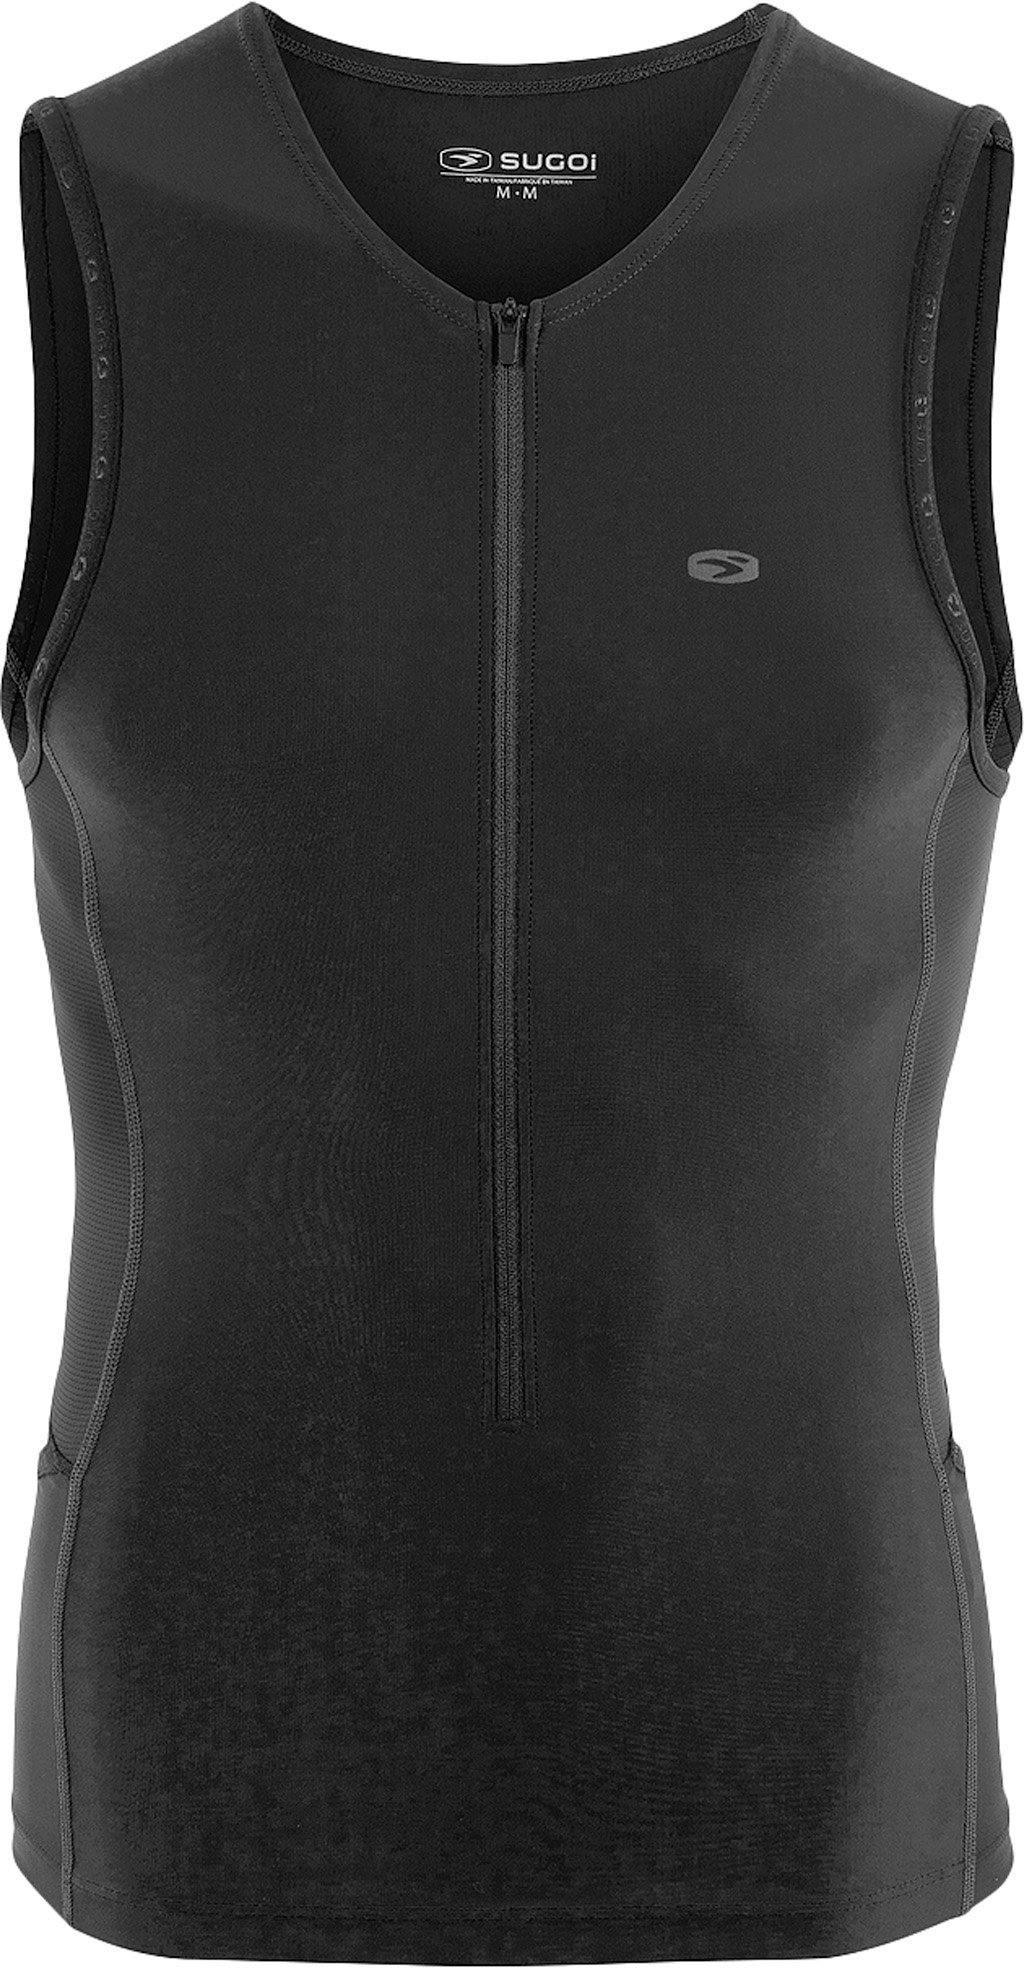 Product image for Rpm Tri Tank Top - Men's